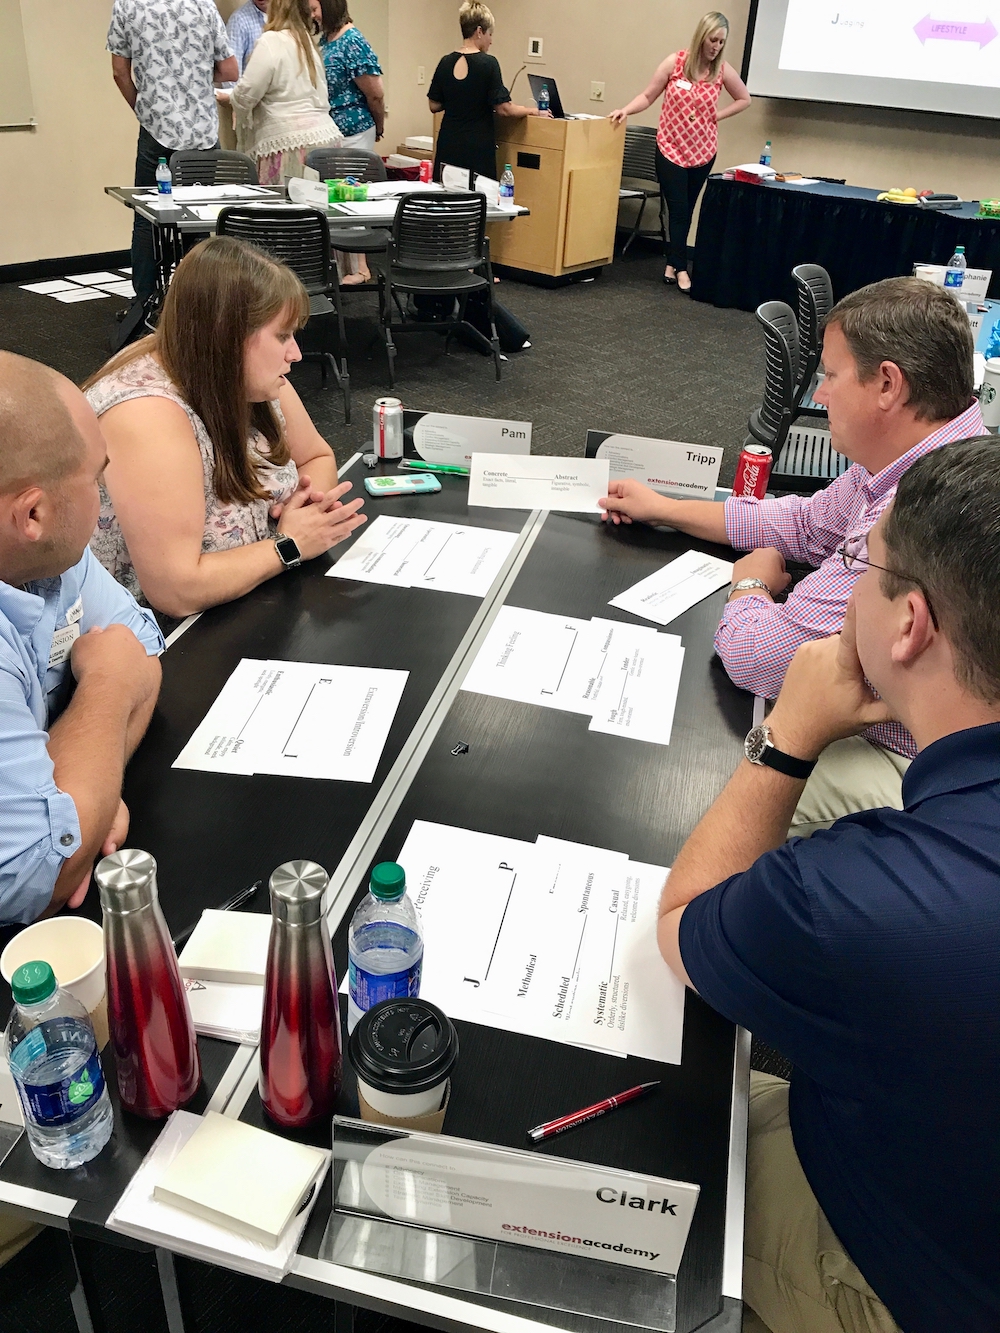 Members of the 2018-2019 class of the University of Georgia's UGA Extension Academy for Professional Excellence work on a group project during one of the leadership institutes in 2018.